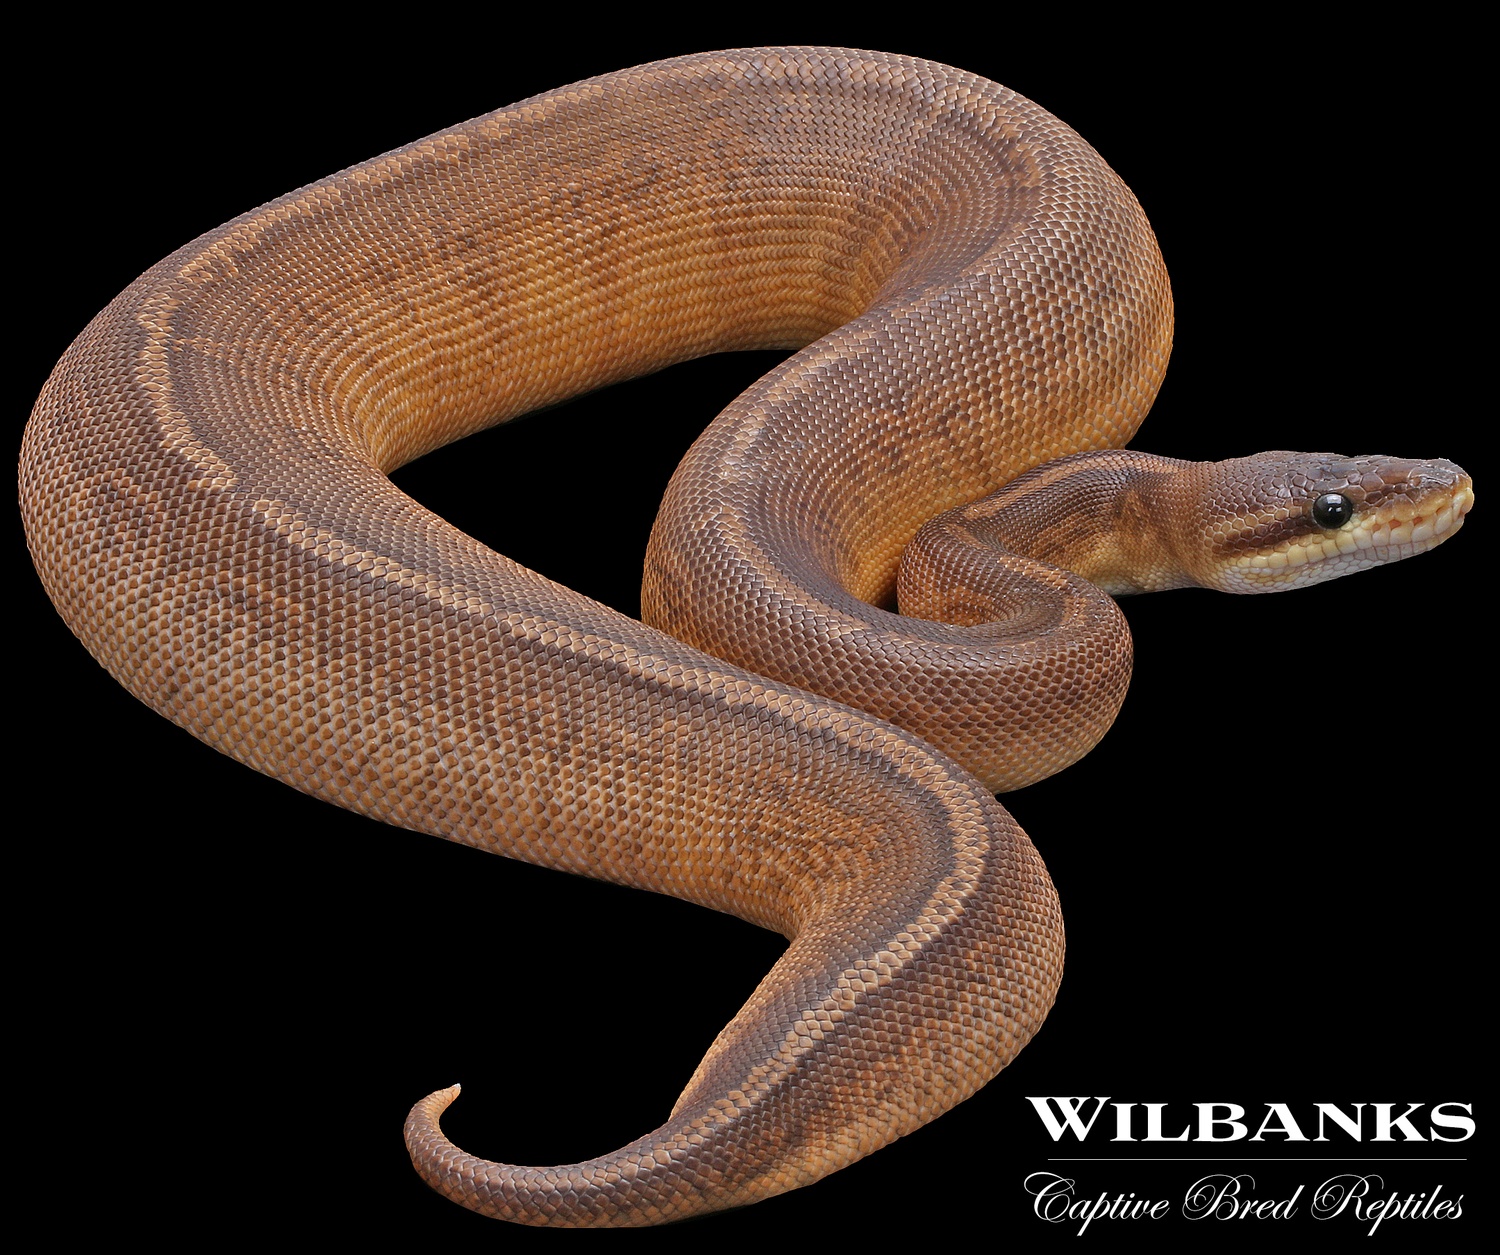 Sunset Black Pastel Ball Python by Wilbanks Captive Bred Reptiles